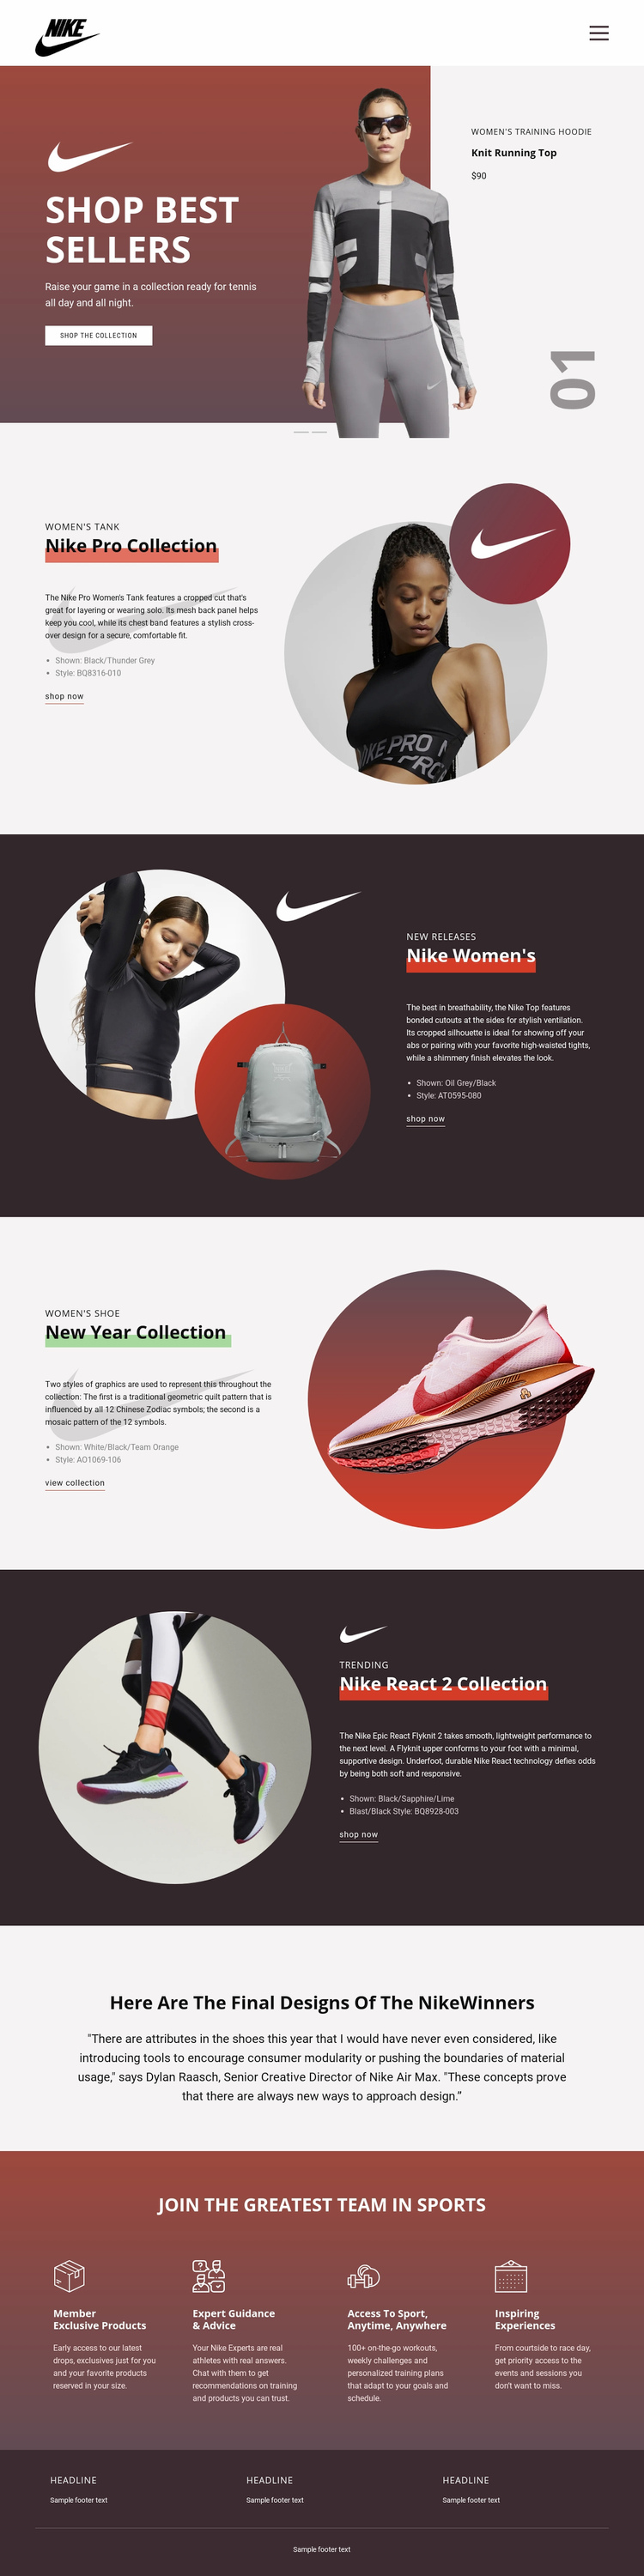 Best sellers for sports Squarespace Template Alternative